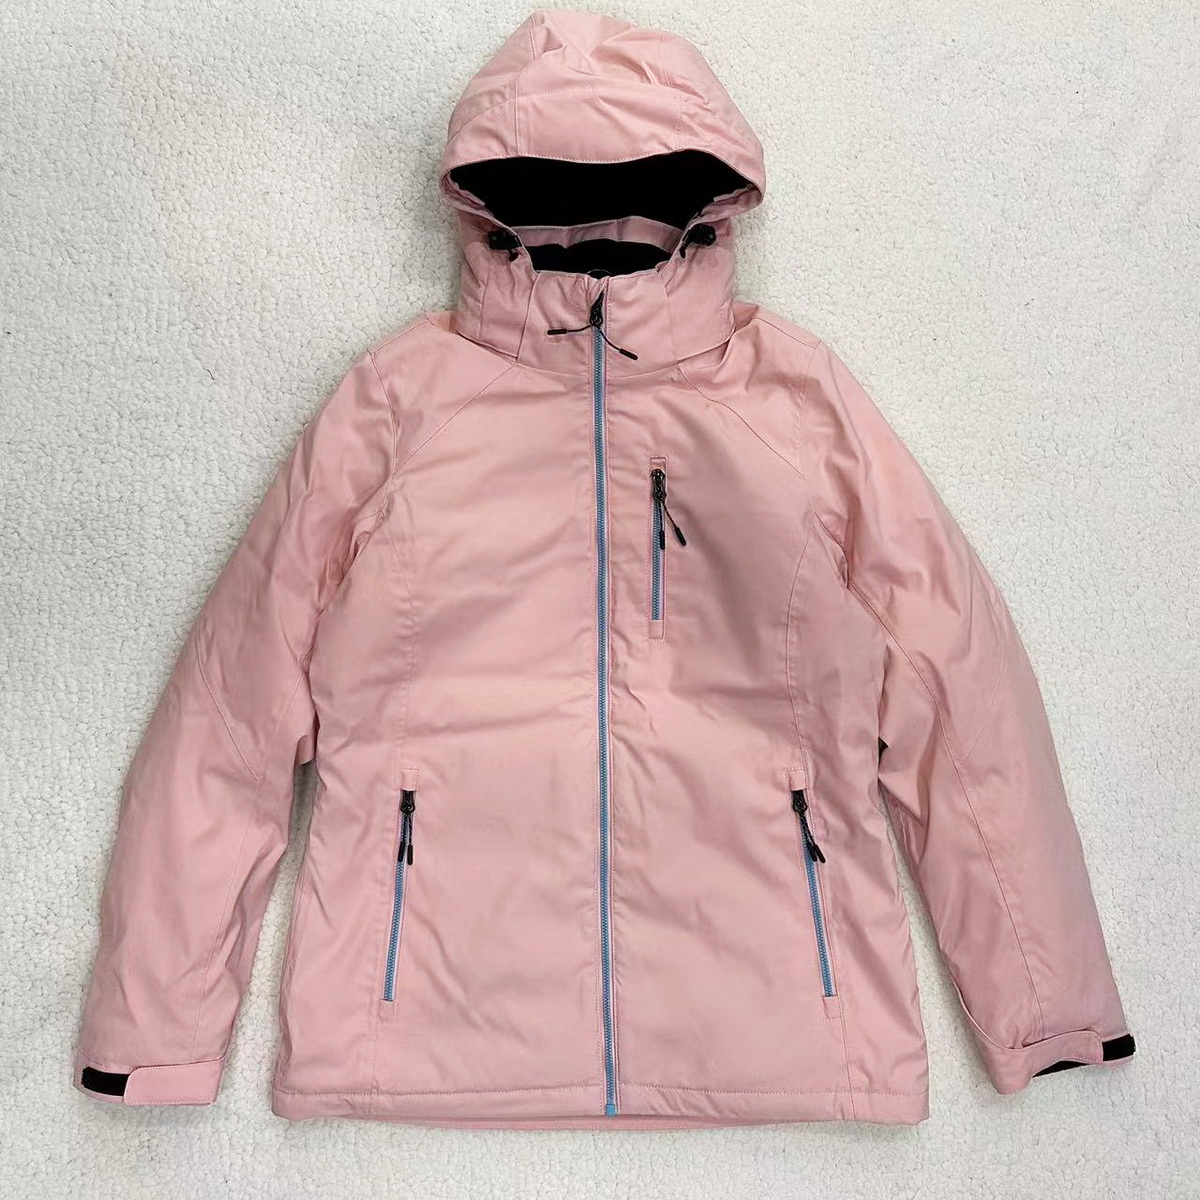 Lady Jacket Padding Apparel Winter Coat Fashion Clothes Outdoor Clothing